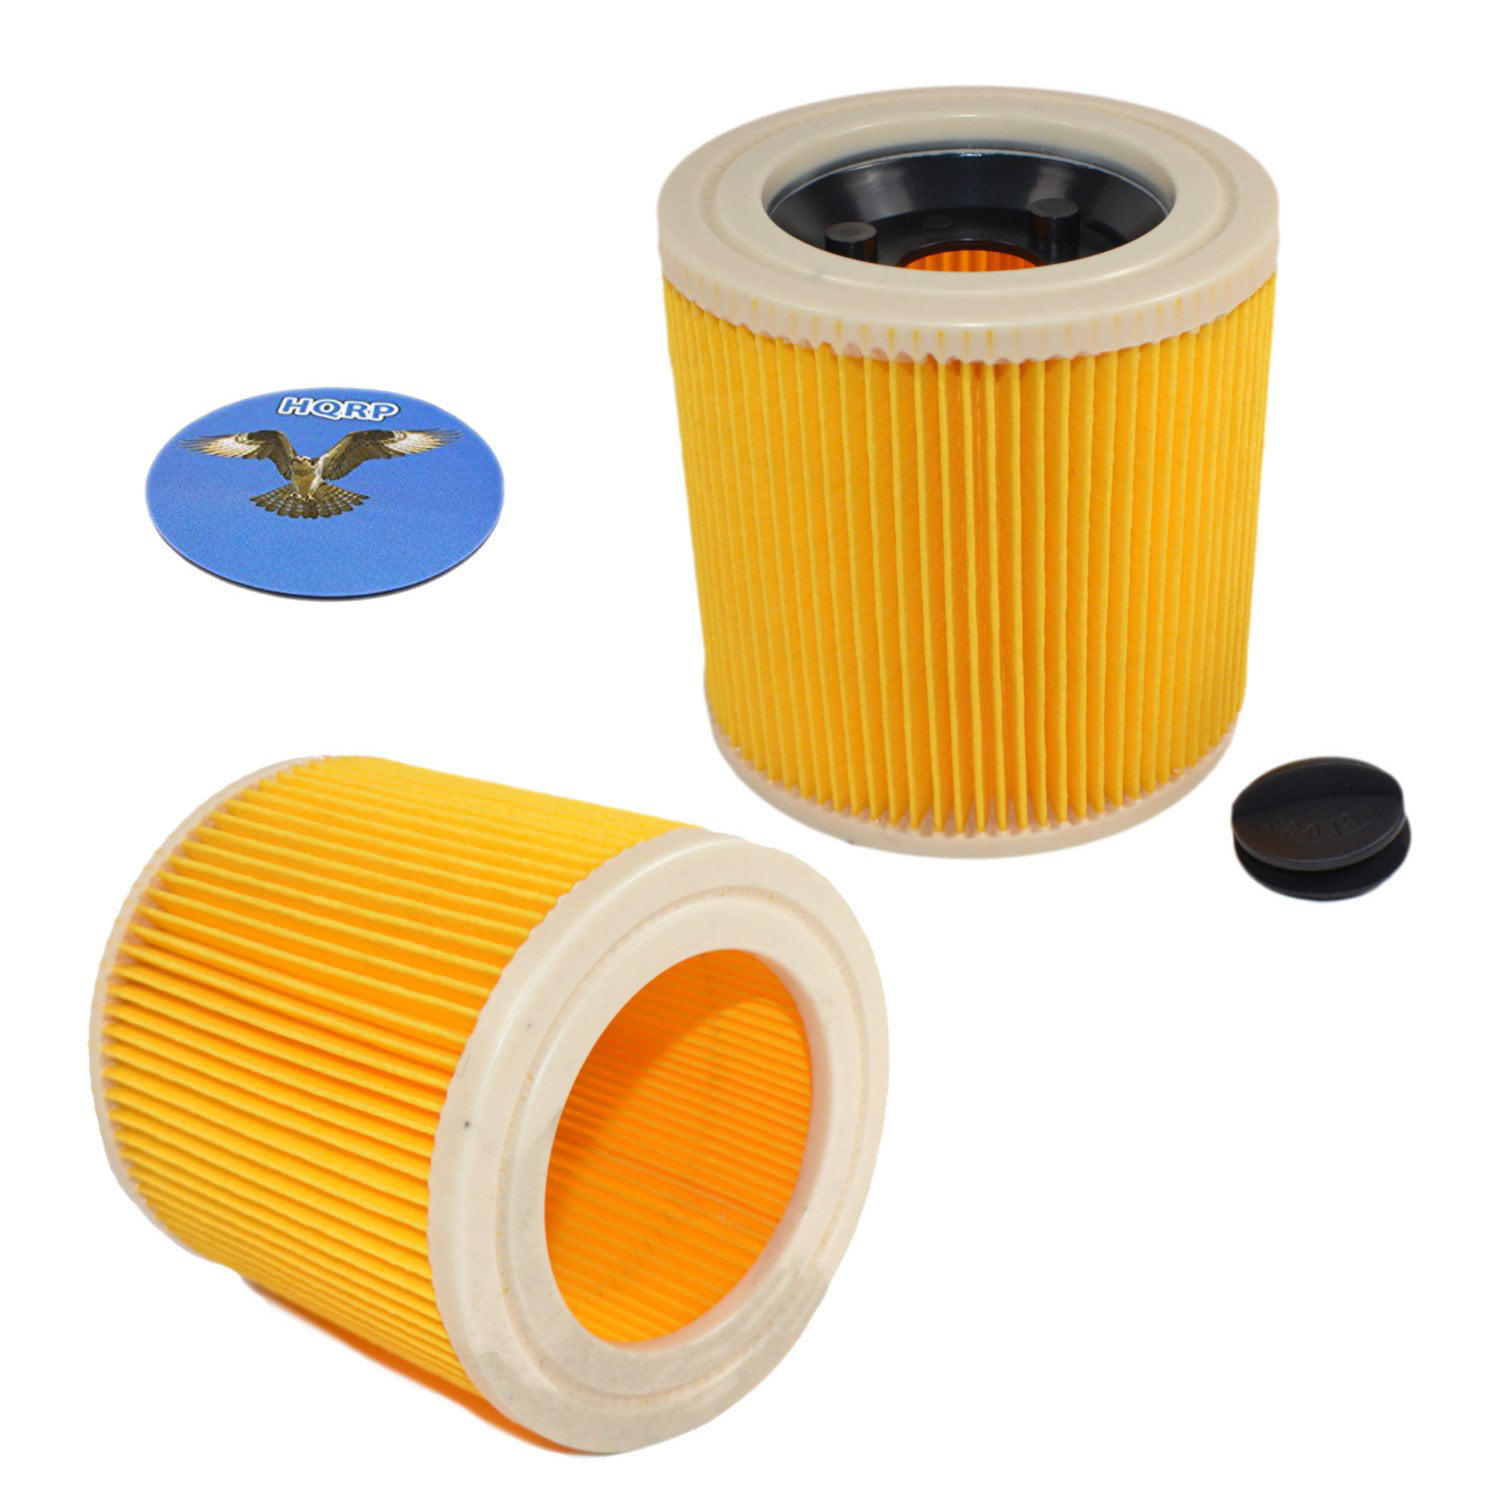 2x cartridge filter for Karcher WD 2.250 WD 2.400 M WD 2.500 M Incl fastening 